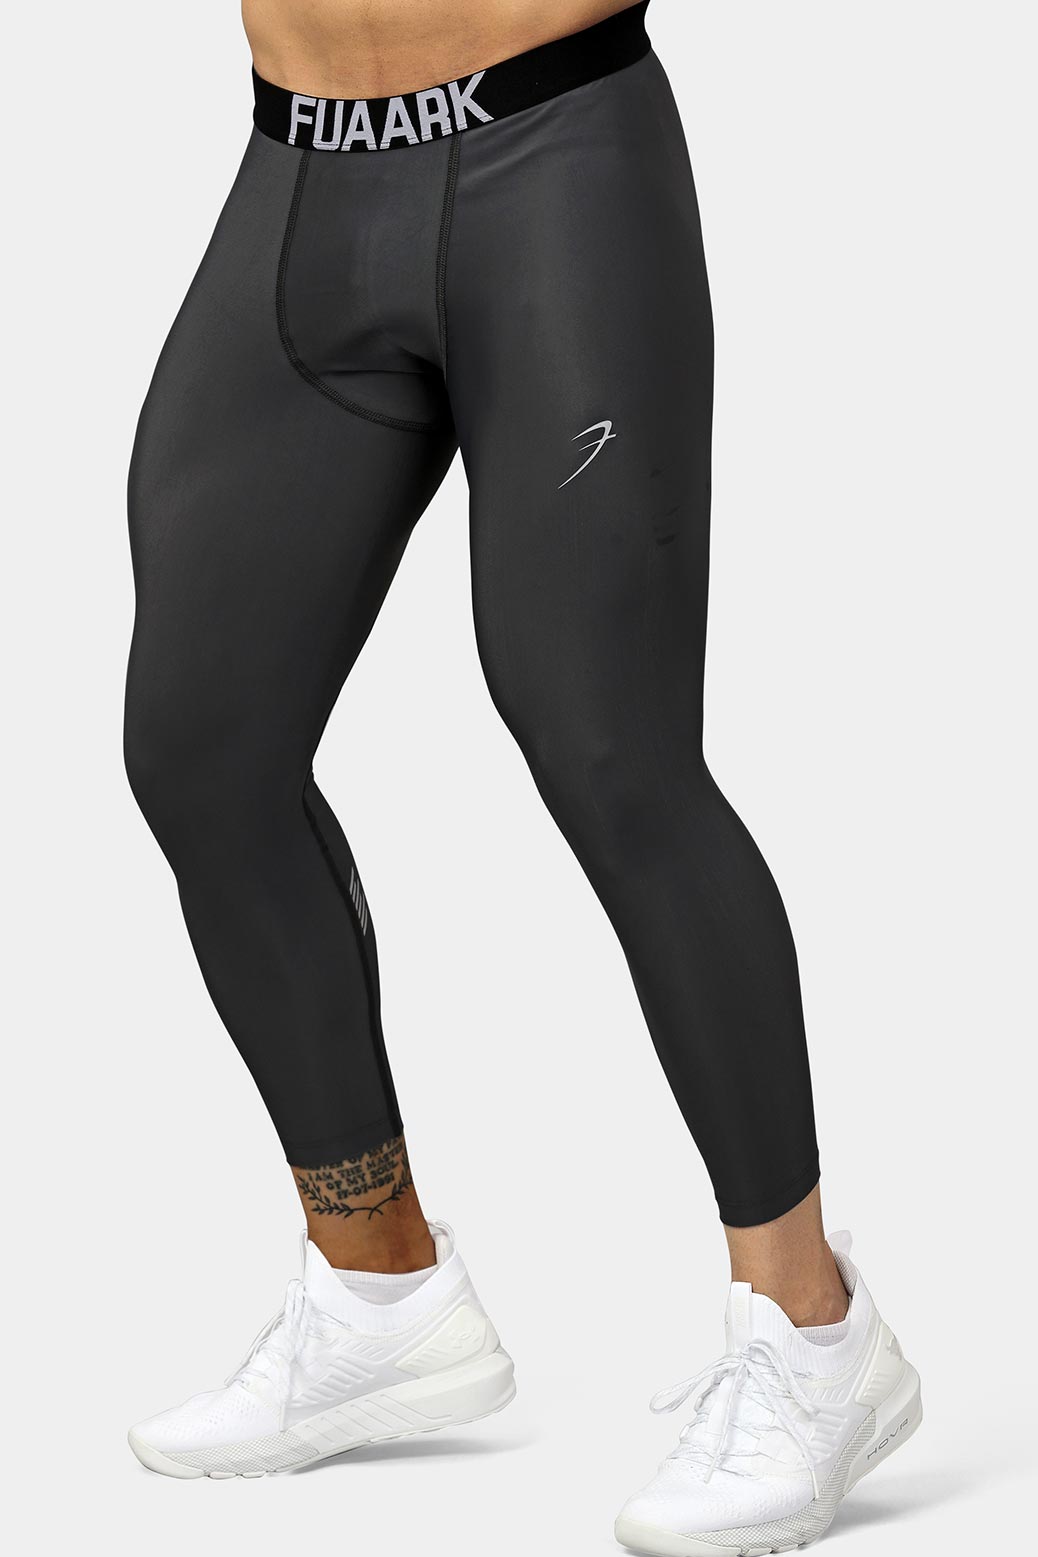 Compression Tights What Do They Do? | Sydney Physio Clinic